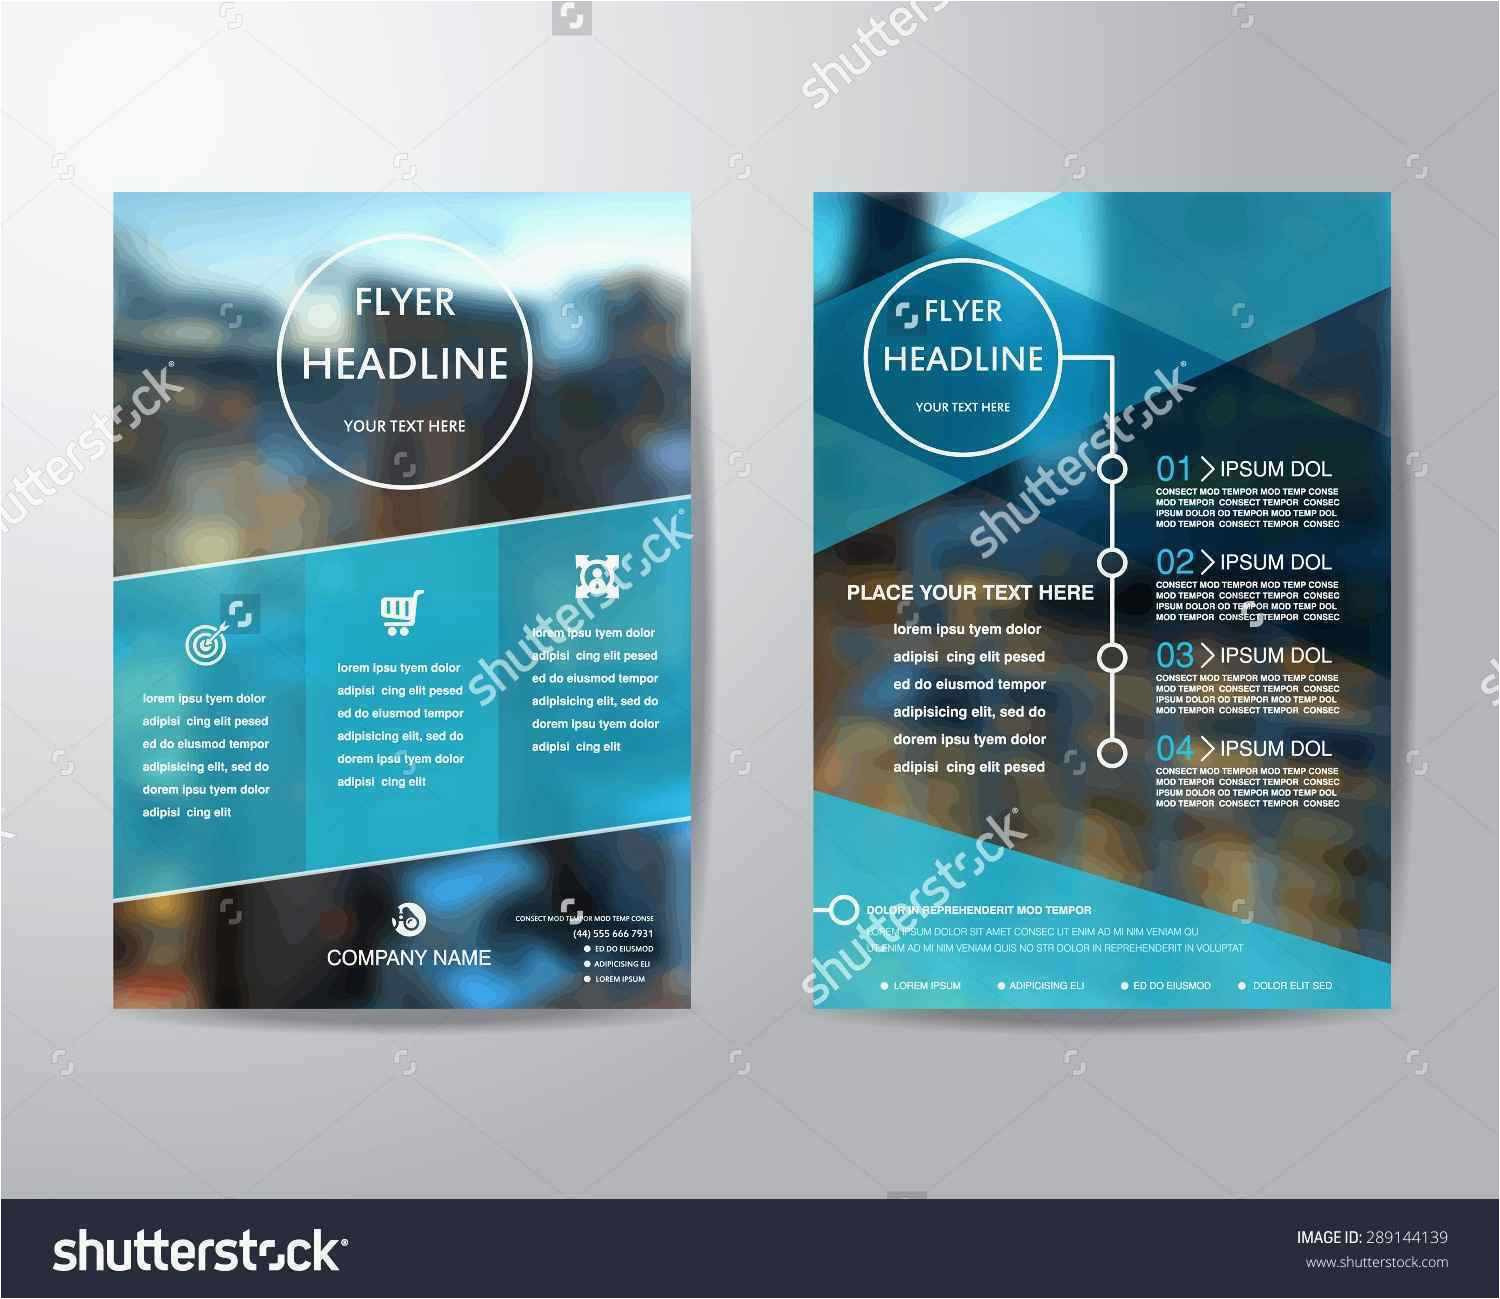 Free 48 Avery Card Templates Examples Of Business Card Templates for Publisher